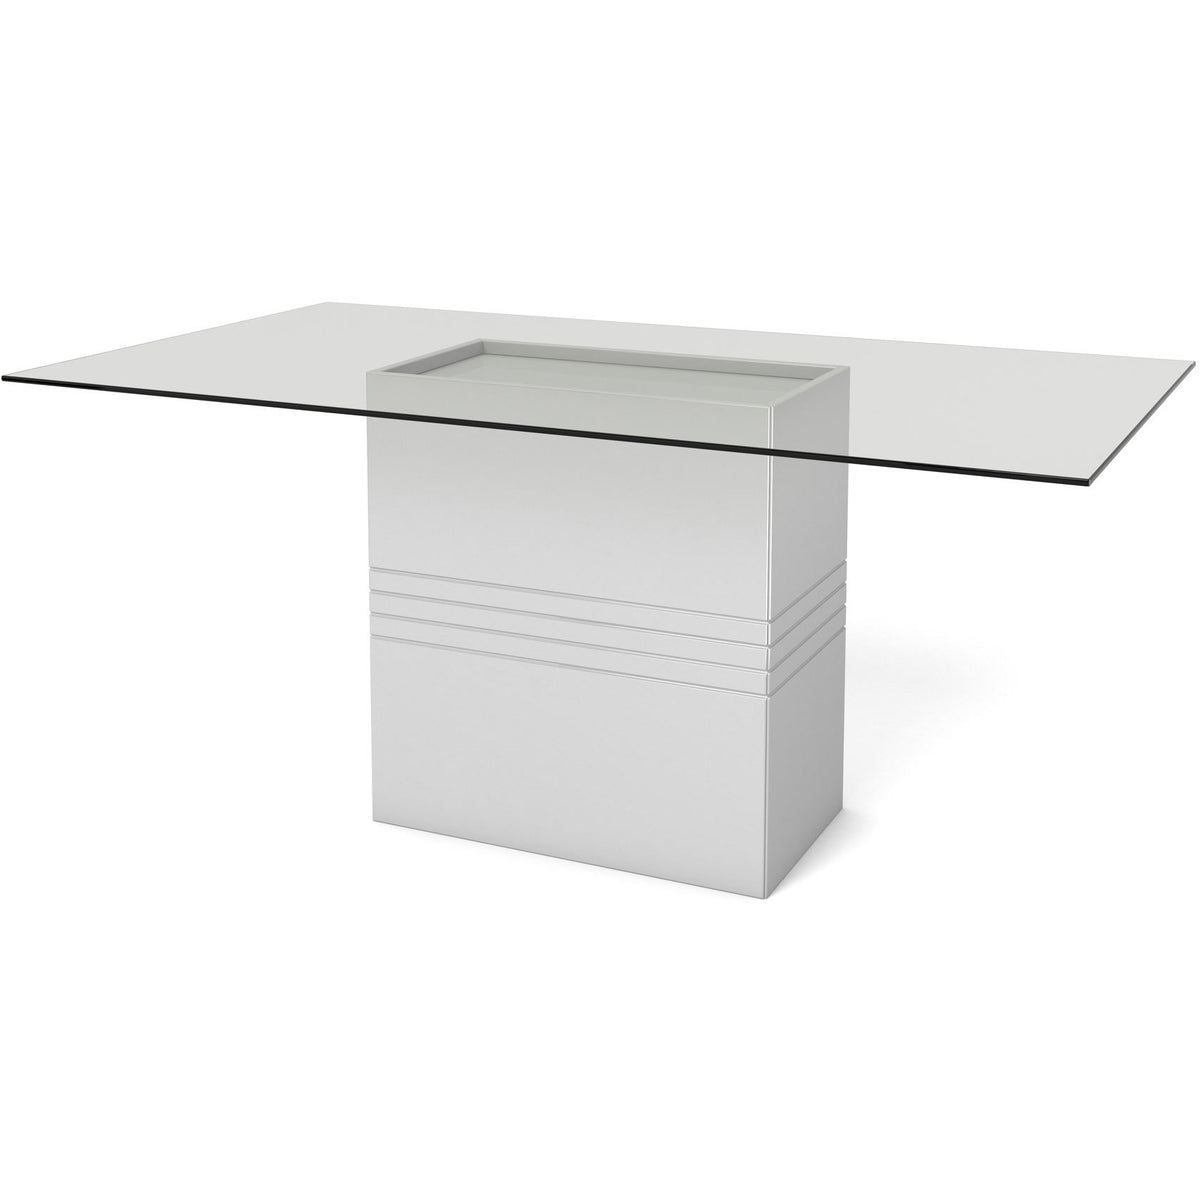 Manhattan Comfort Perry 1.6 - 70.87 in Sleek Tempered Glass Table Top in White Gloss-Minimal & Modern